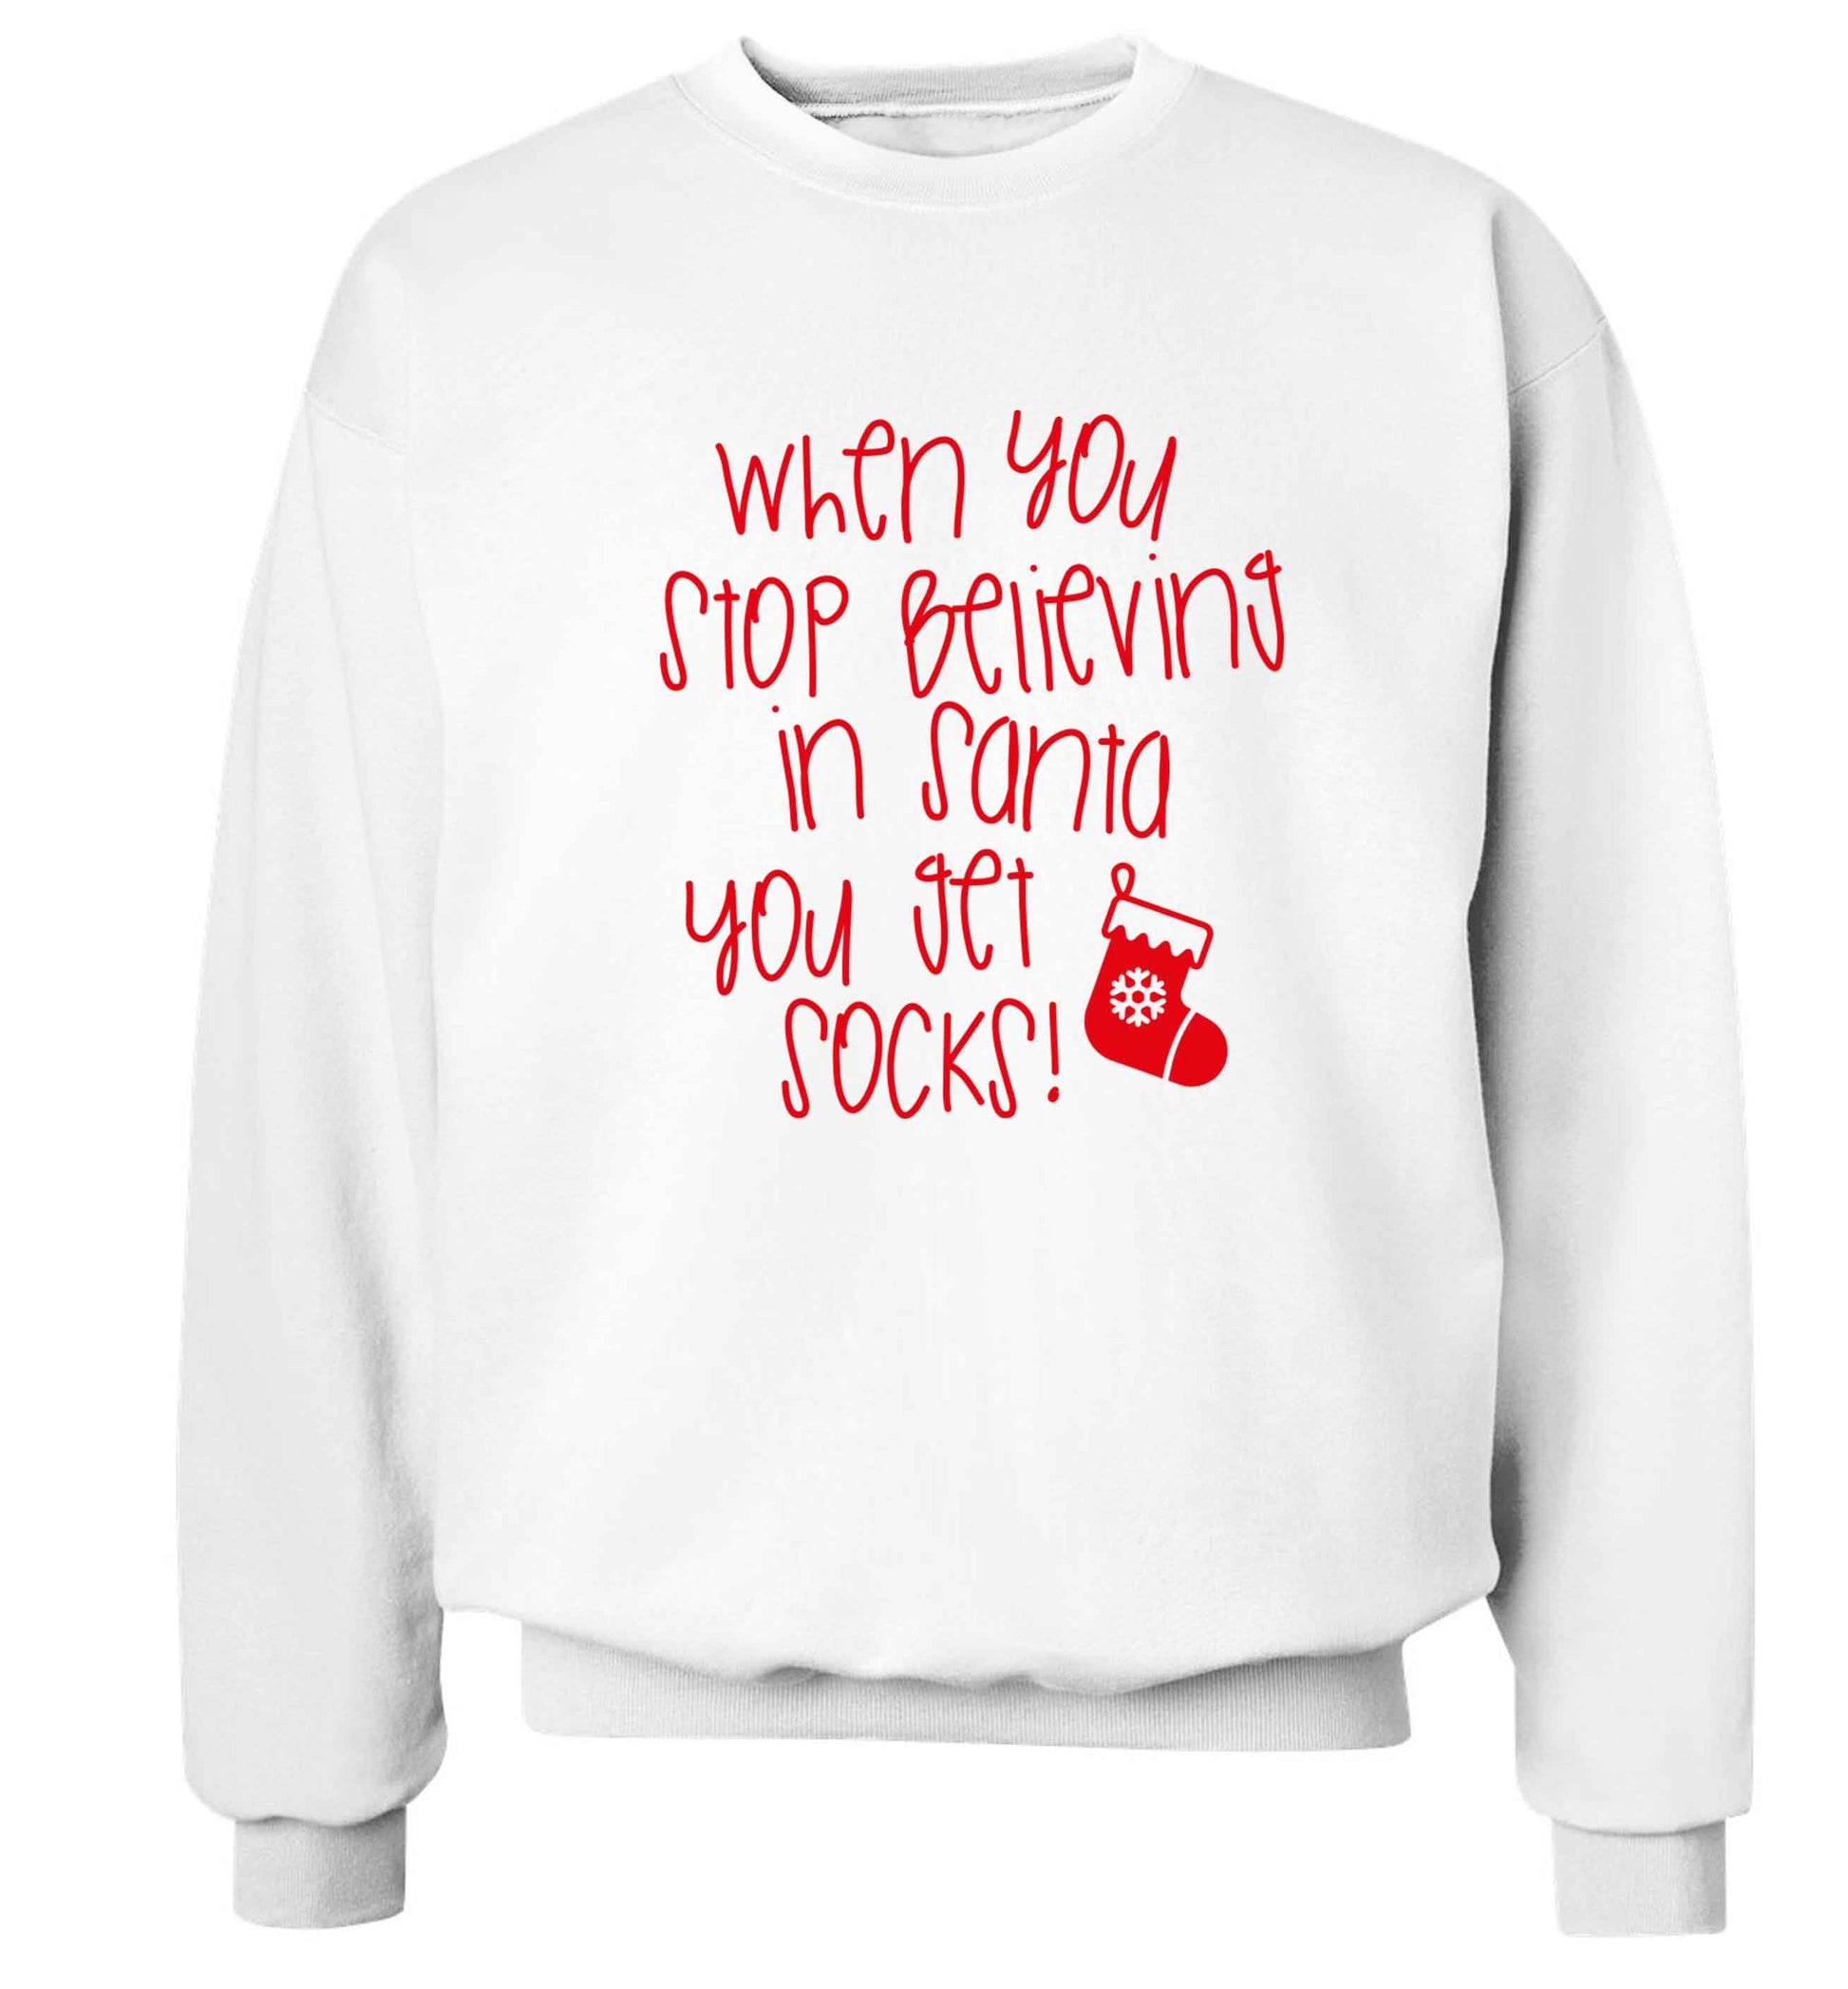 When you stop believing in santa you get socks Adult's unisex white Sweater 2XL